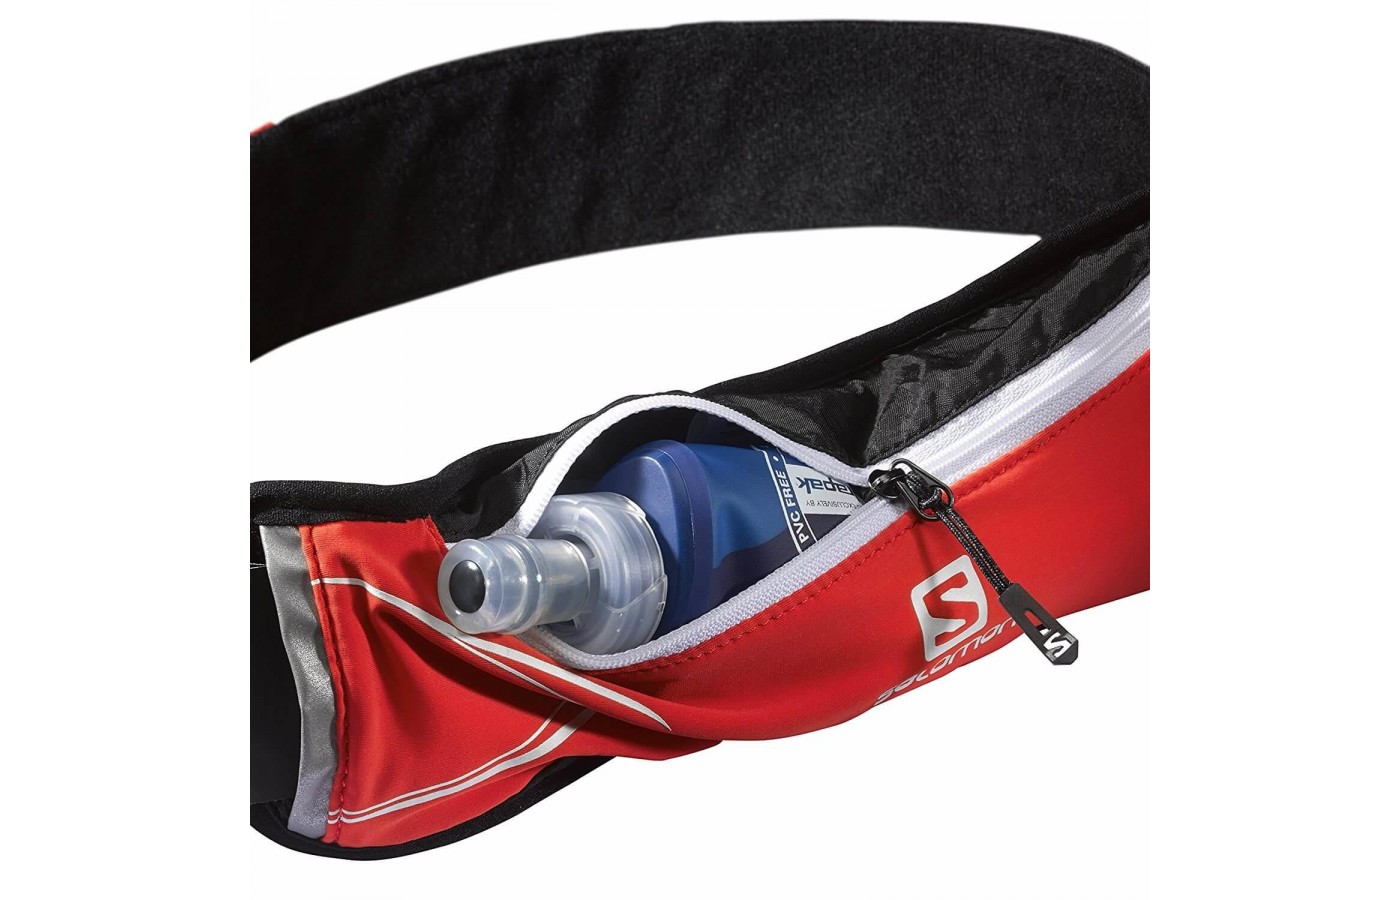 The included soft water flask fits perfectly in the belt's zippered pouch.